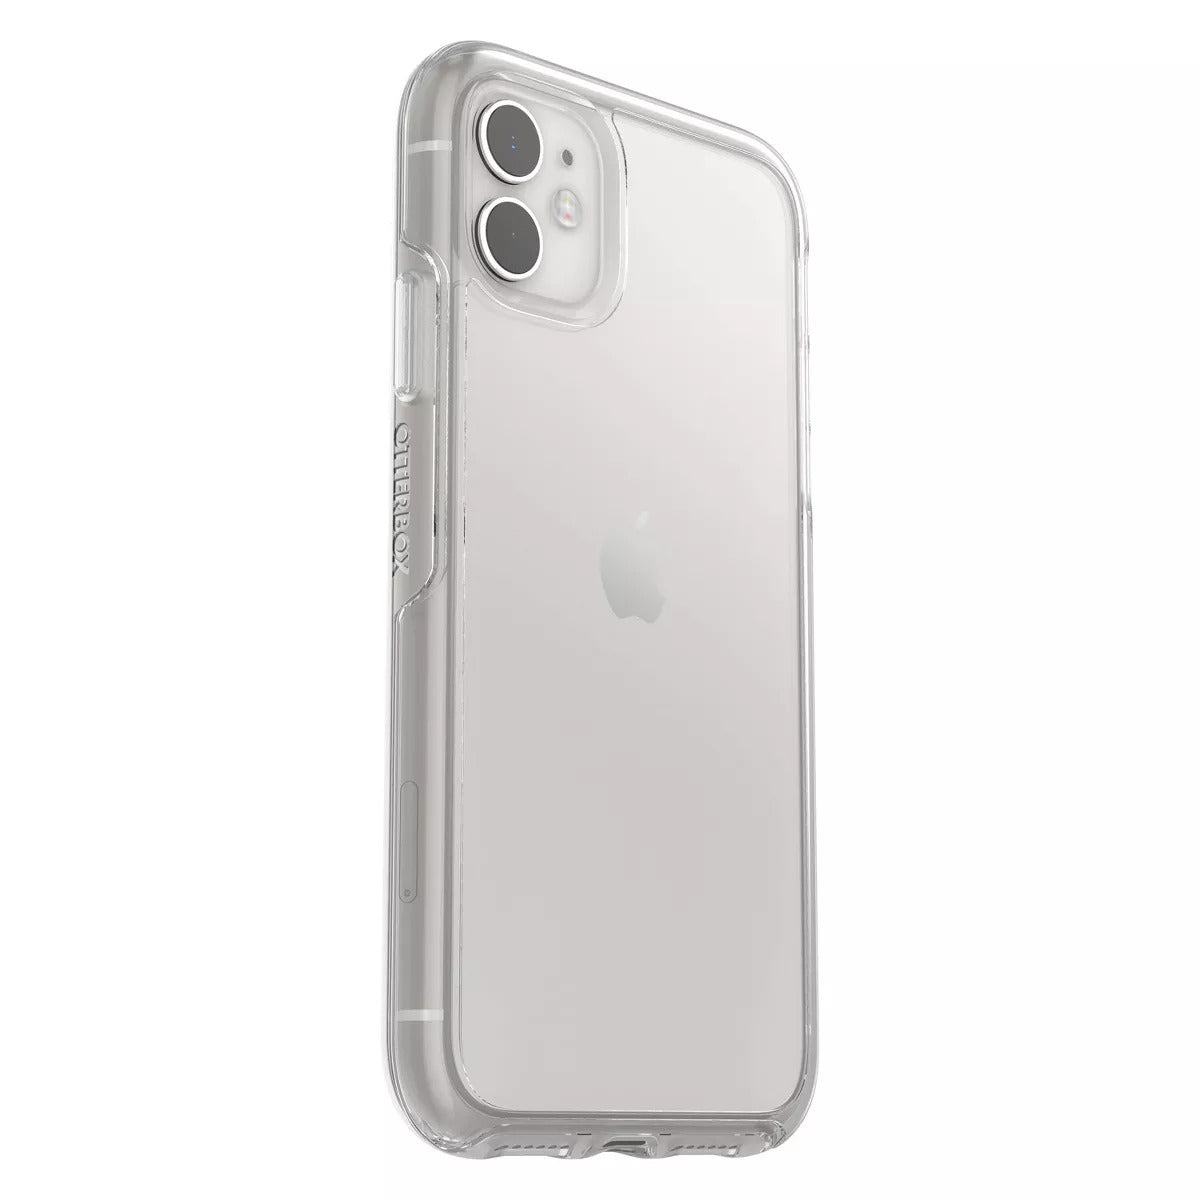 OtterBox SYMMETRY SERIES Case for iPhone 11/XR - Clear (Certified Refubrbished)